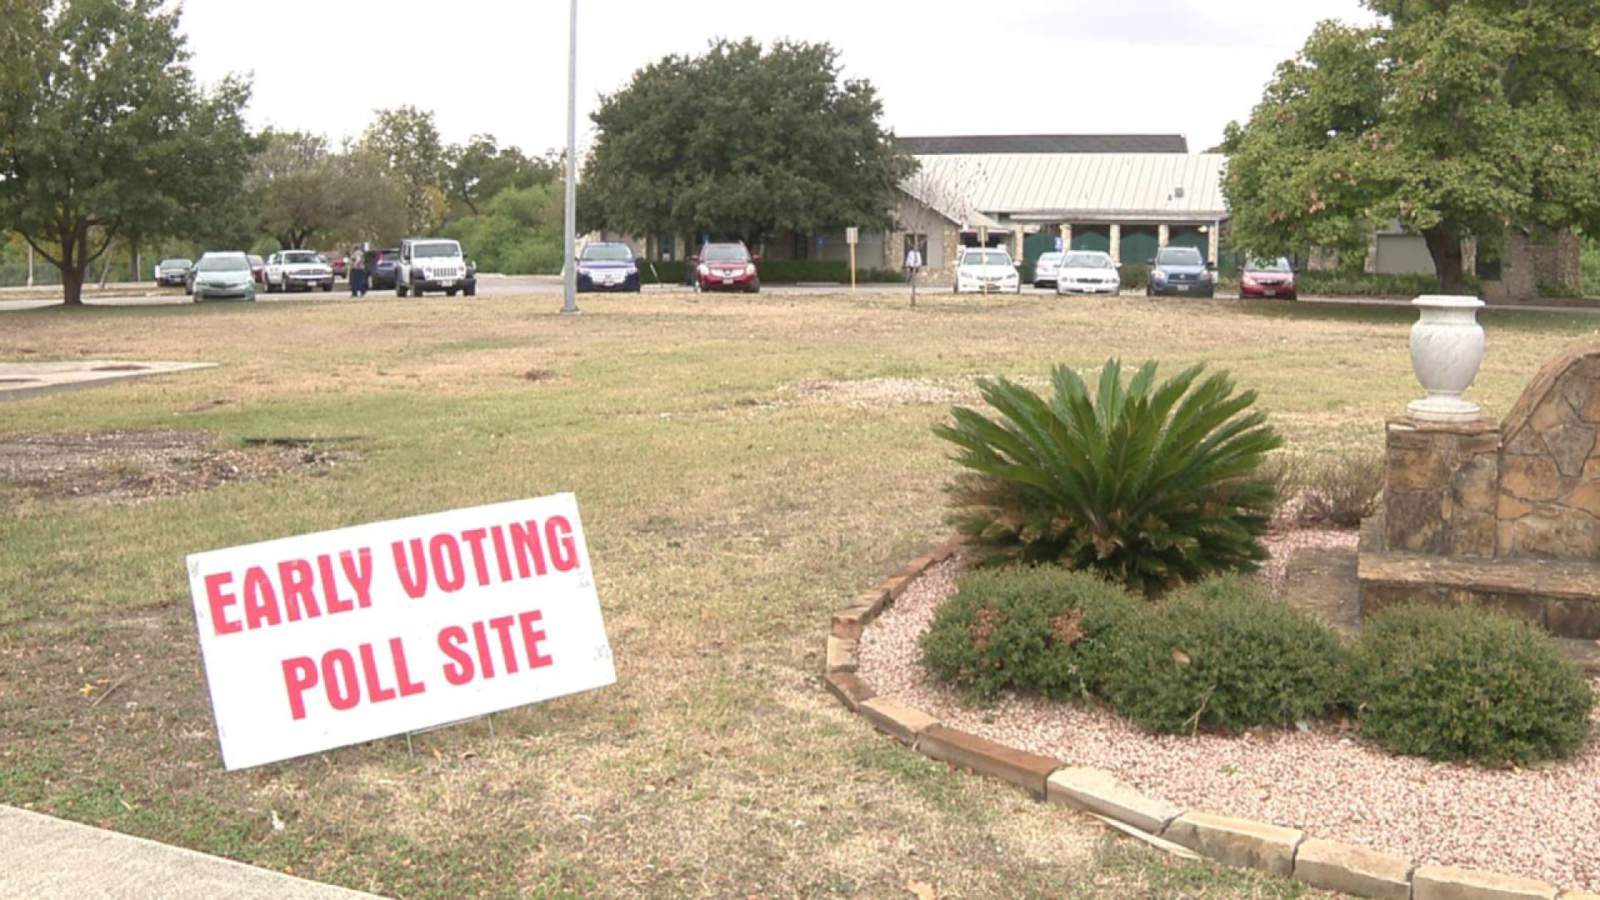 With five days left, Bexar County surpasses 2016 early voting numbers